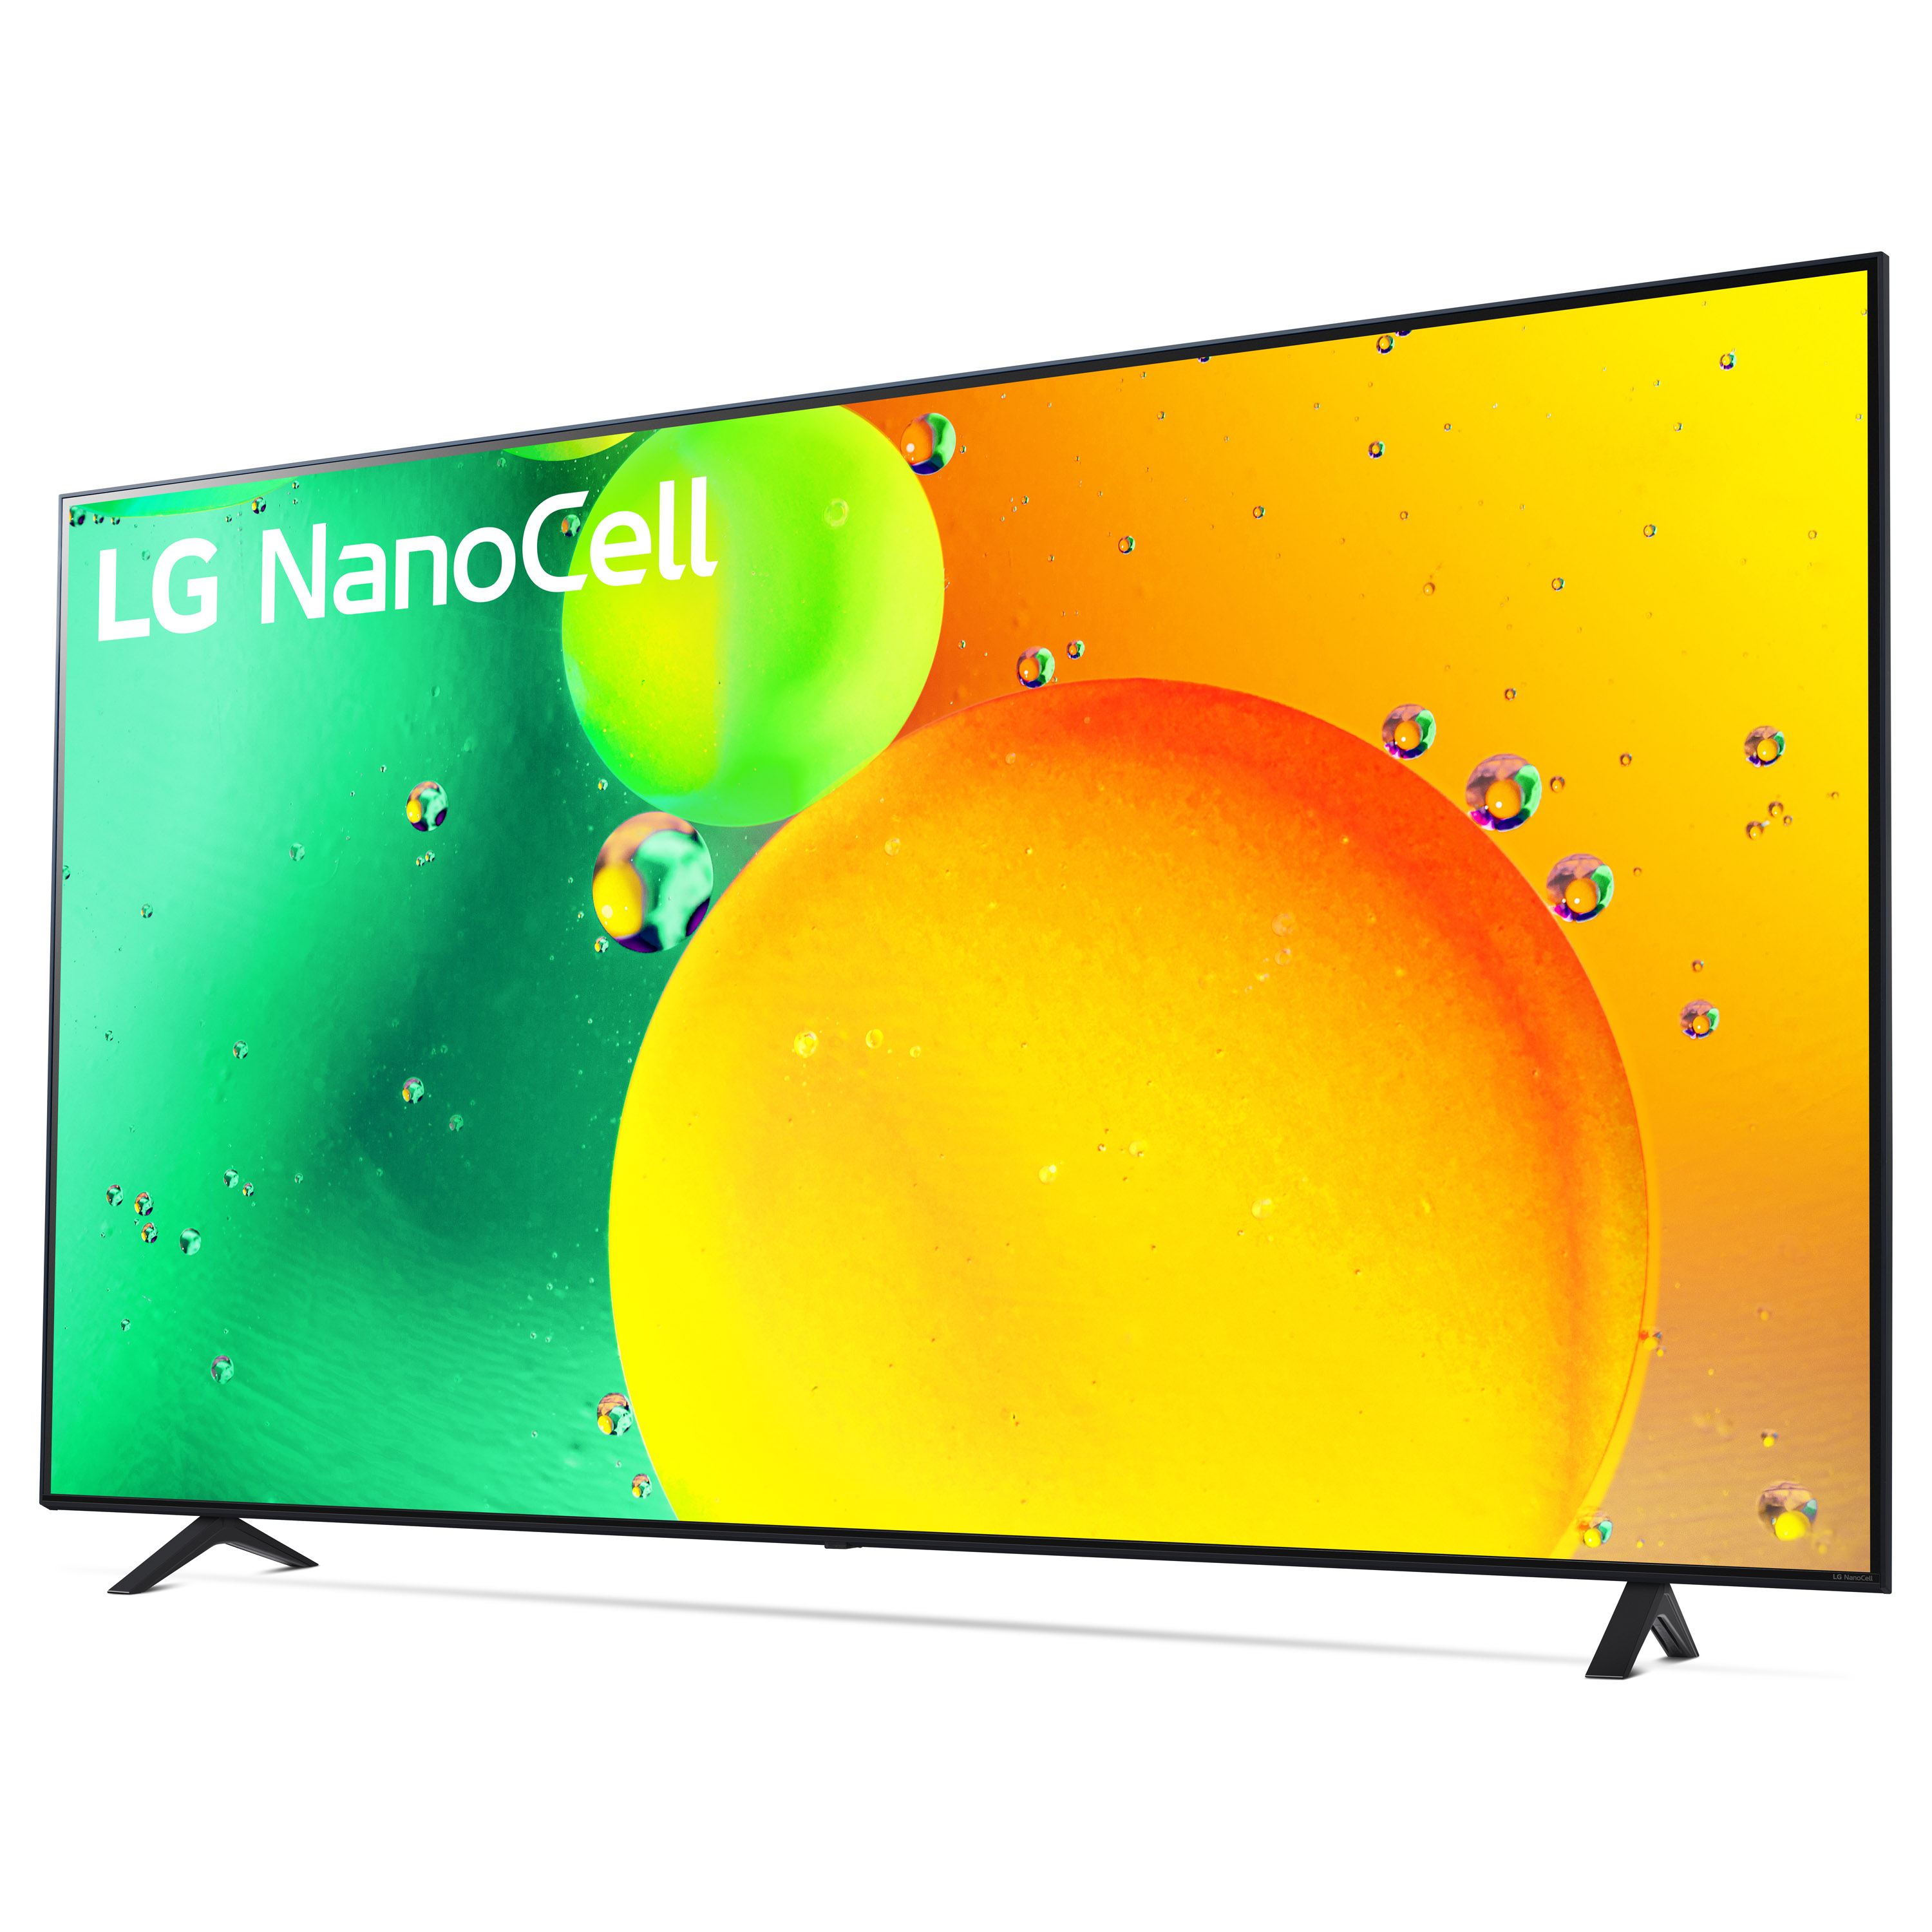 LG 75 inch Class 4K UHD Nano Cell Web OS Smart TV with Active HDR 75 Series 75NANO75UQA - image 5 of 22